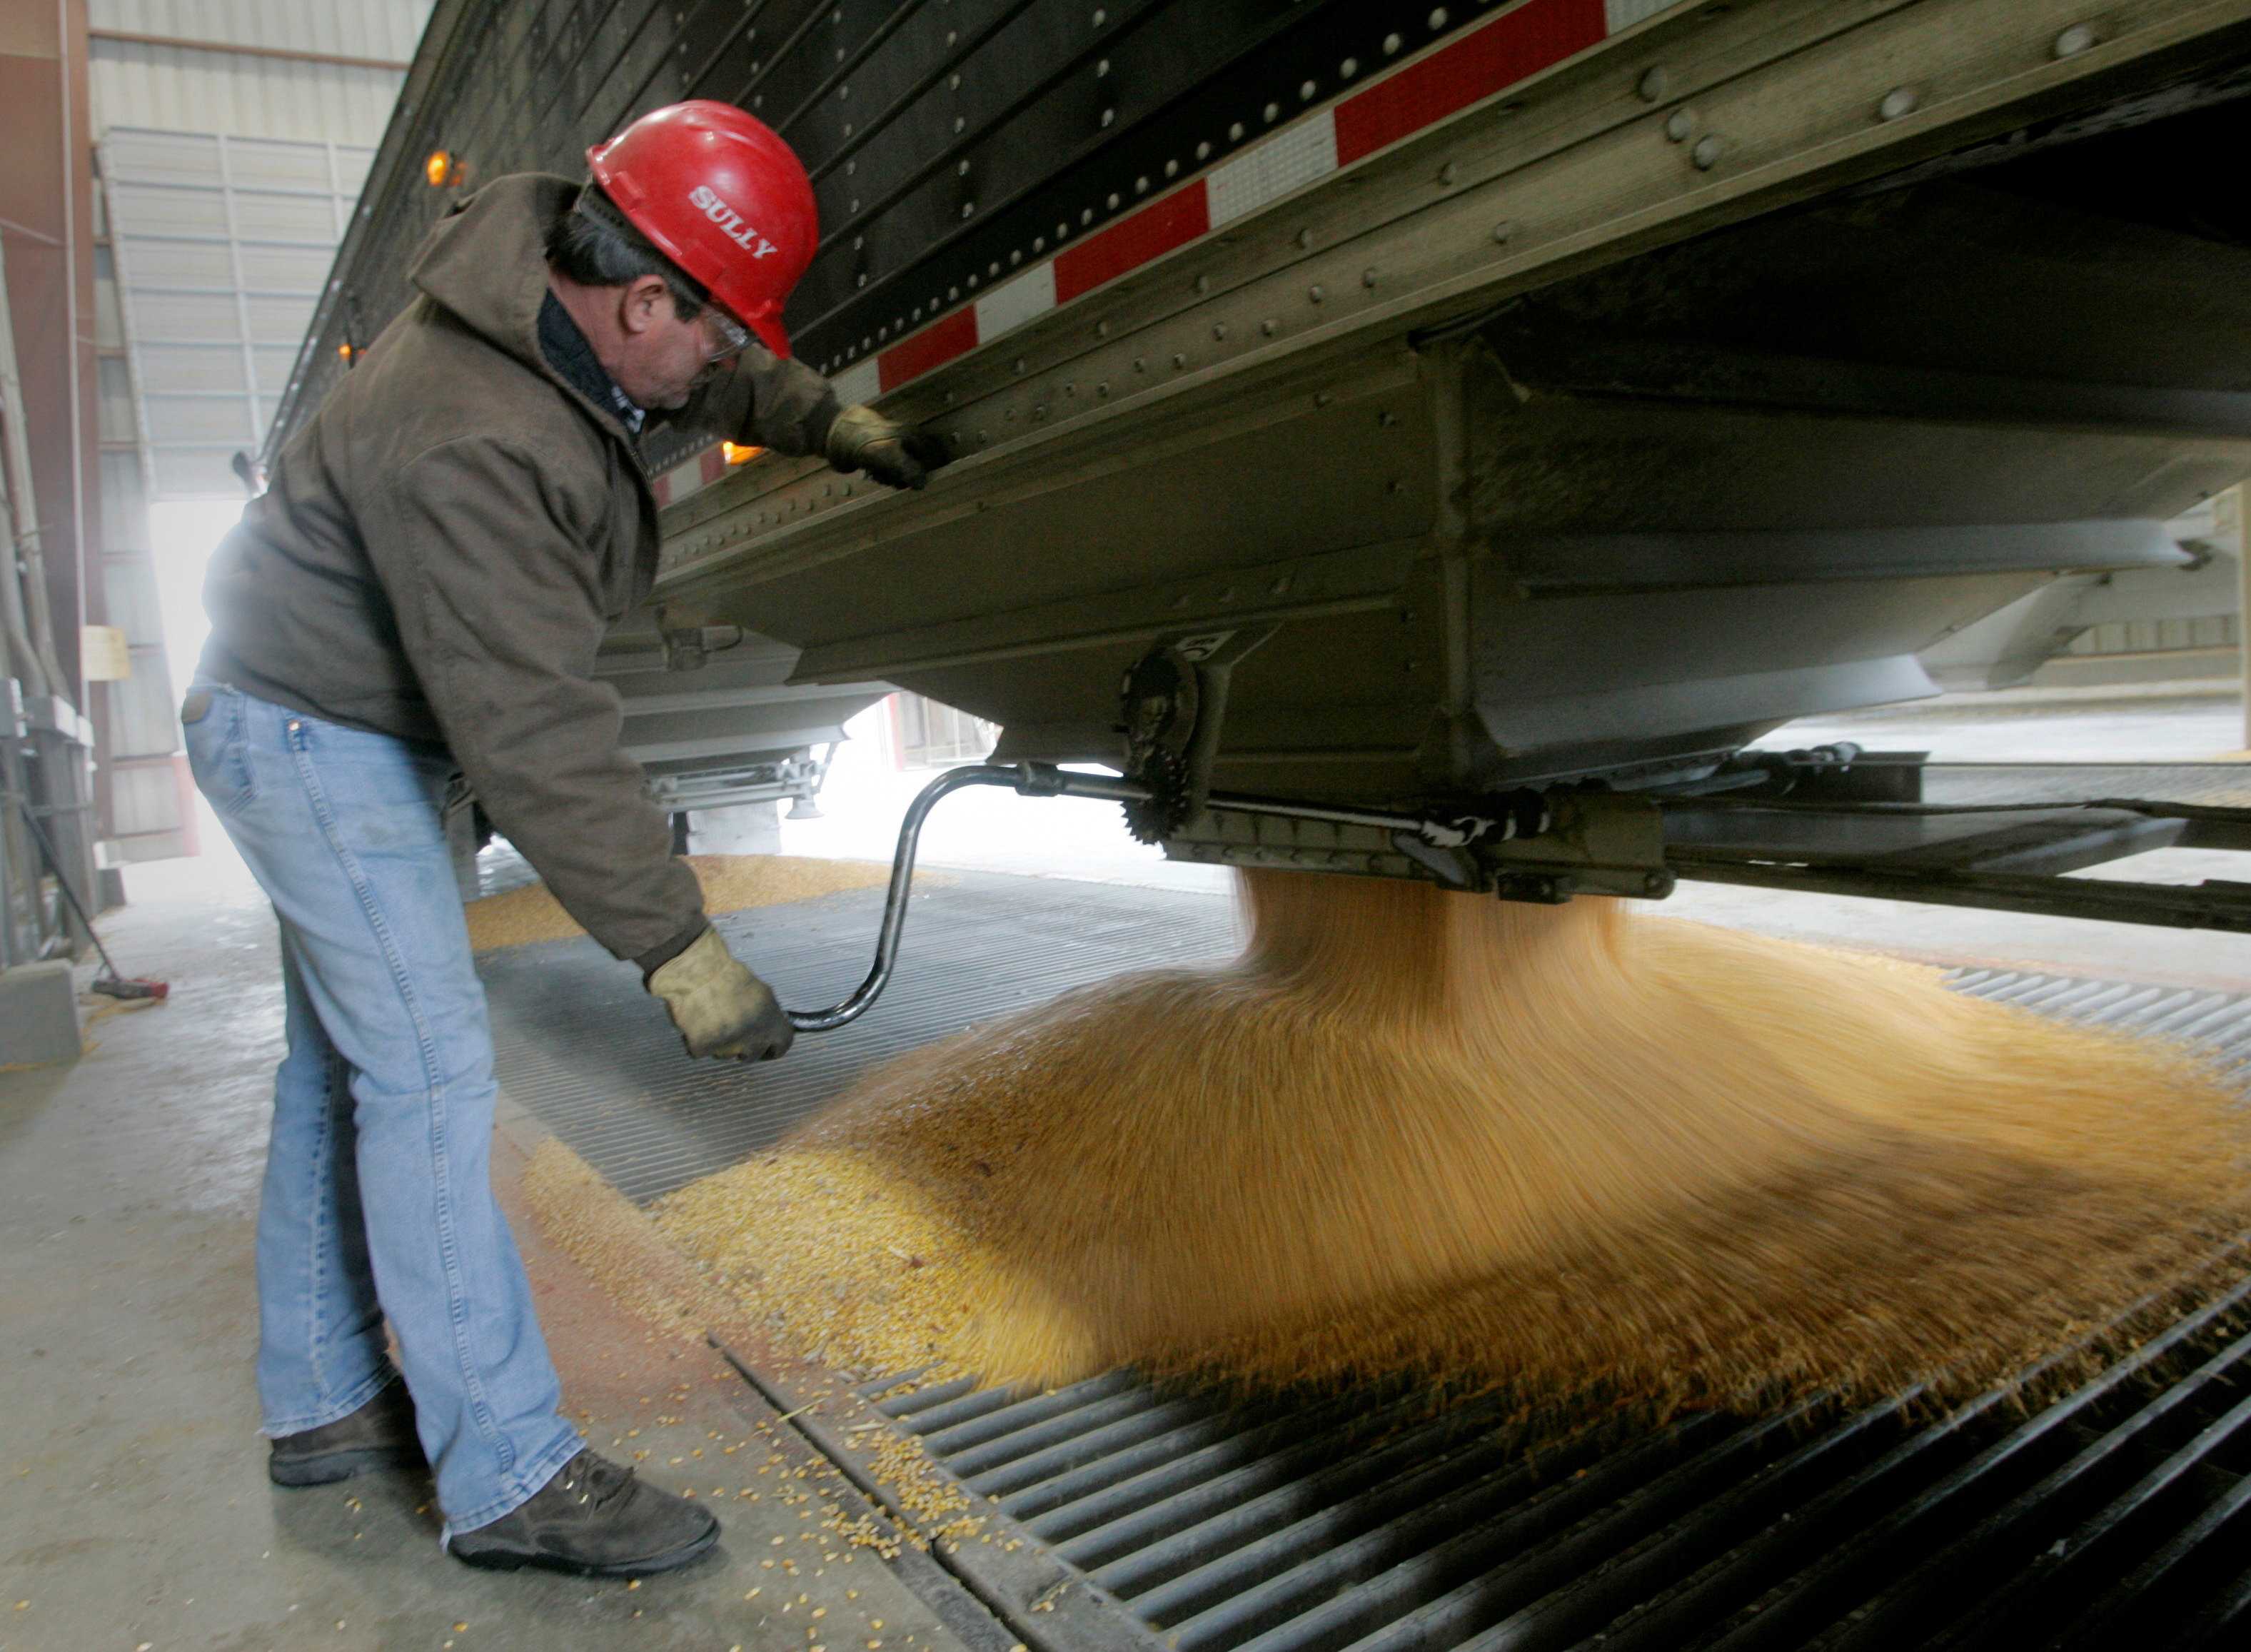 A truckdriver unloads his cargo of corn into a chute at the Lincolnway Energy plant in Nevada, Iowa